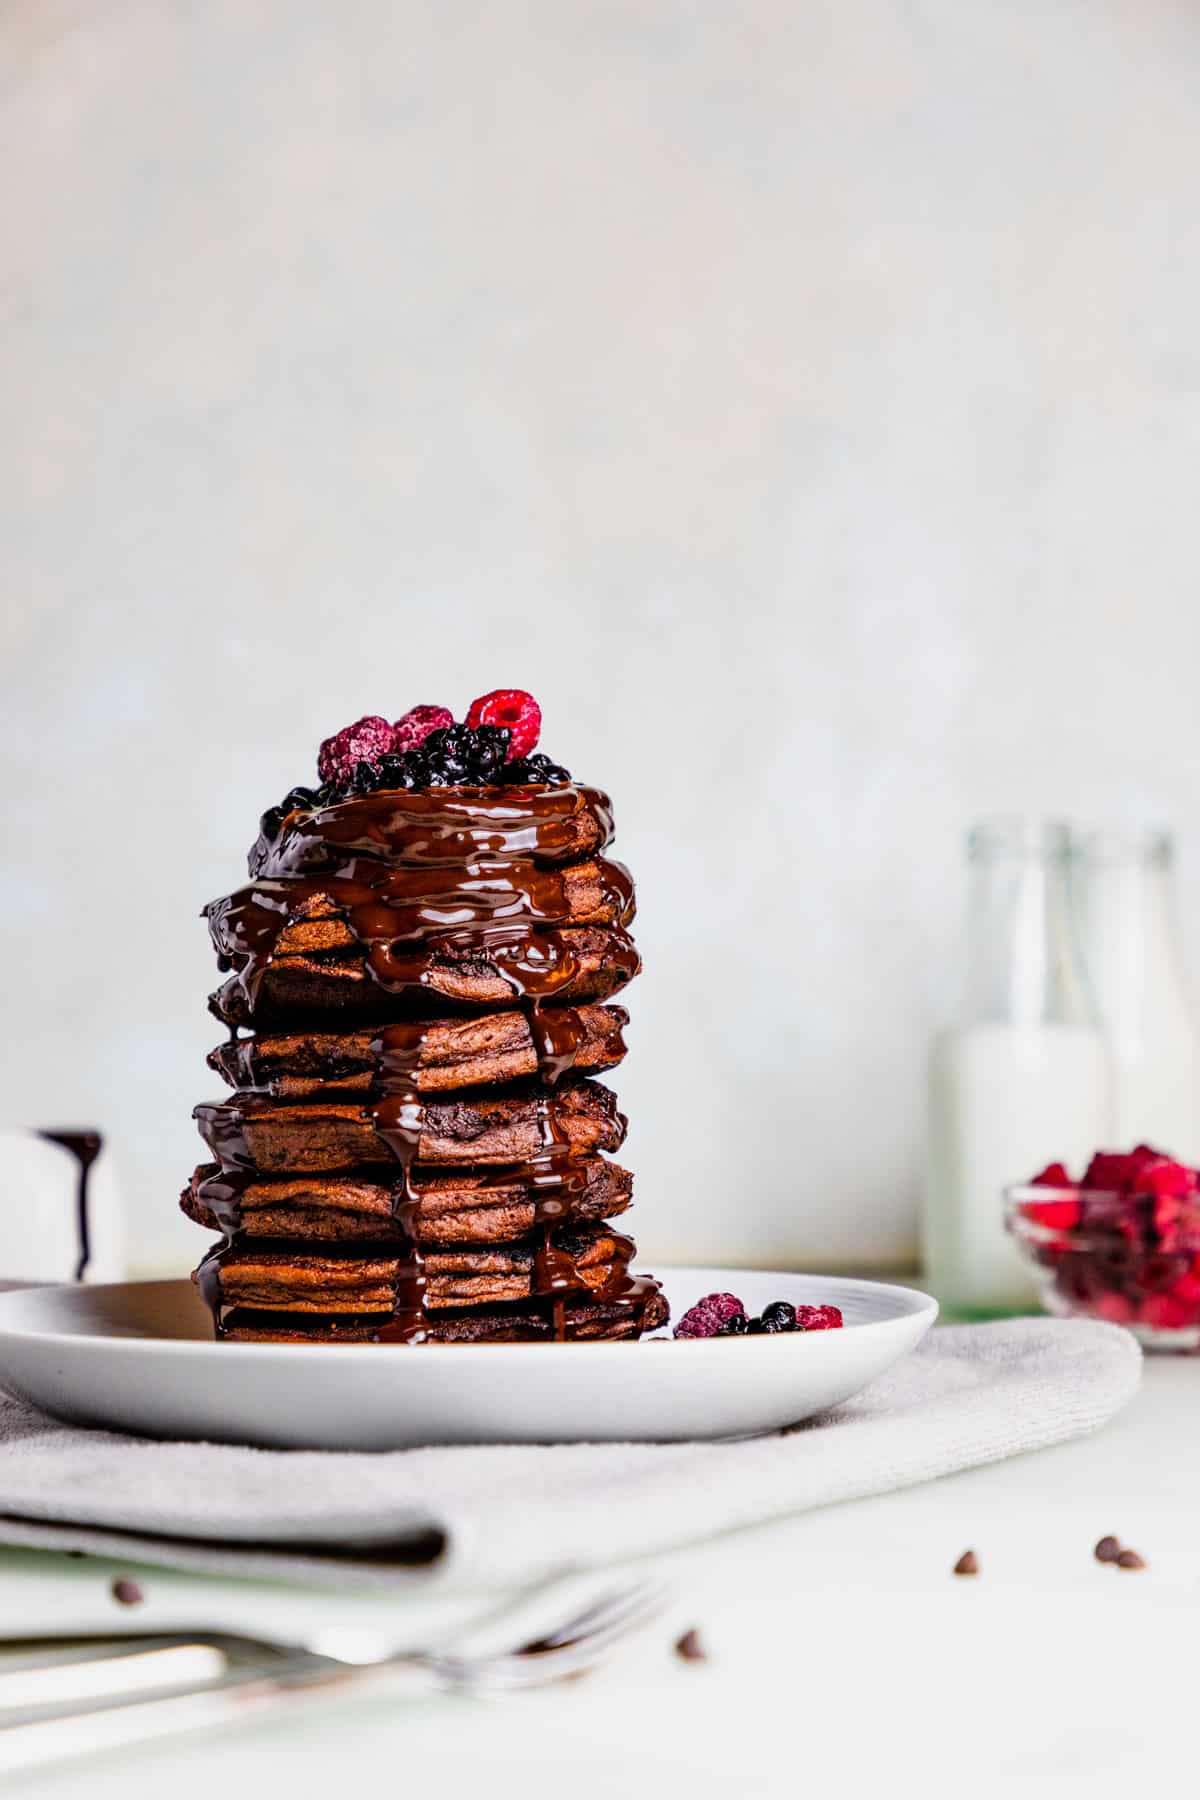 chocolate pancakes stacked on top of each other, topped with chocolate ganache and fresh berries.